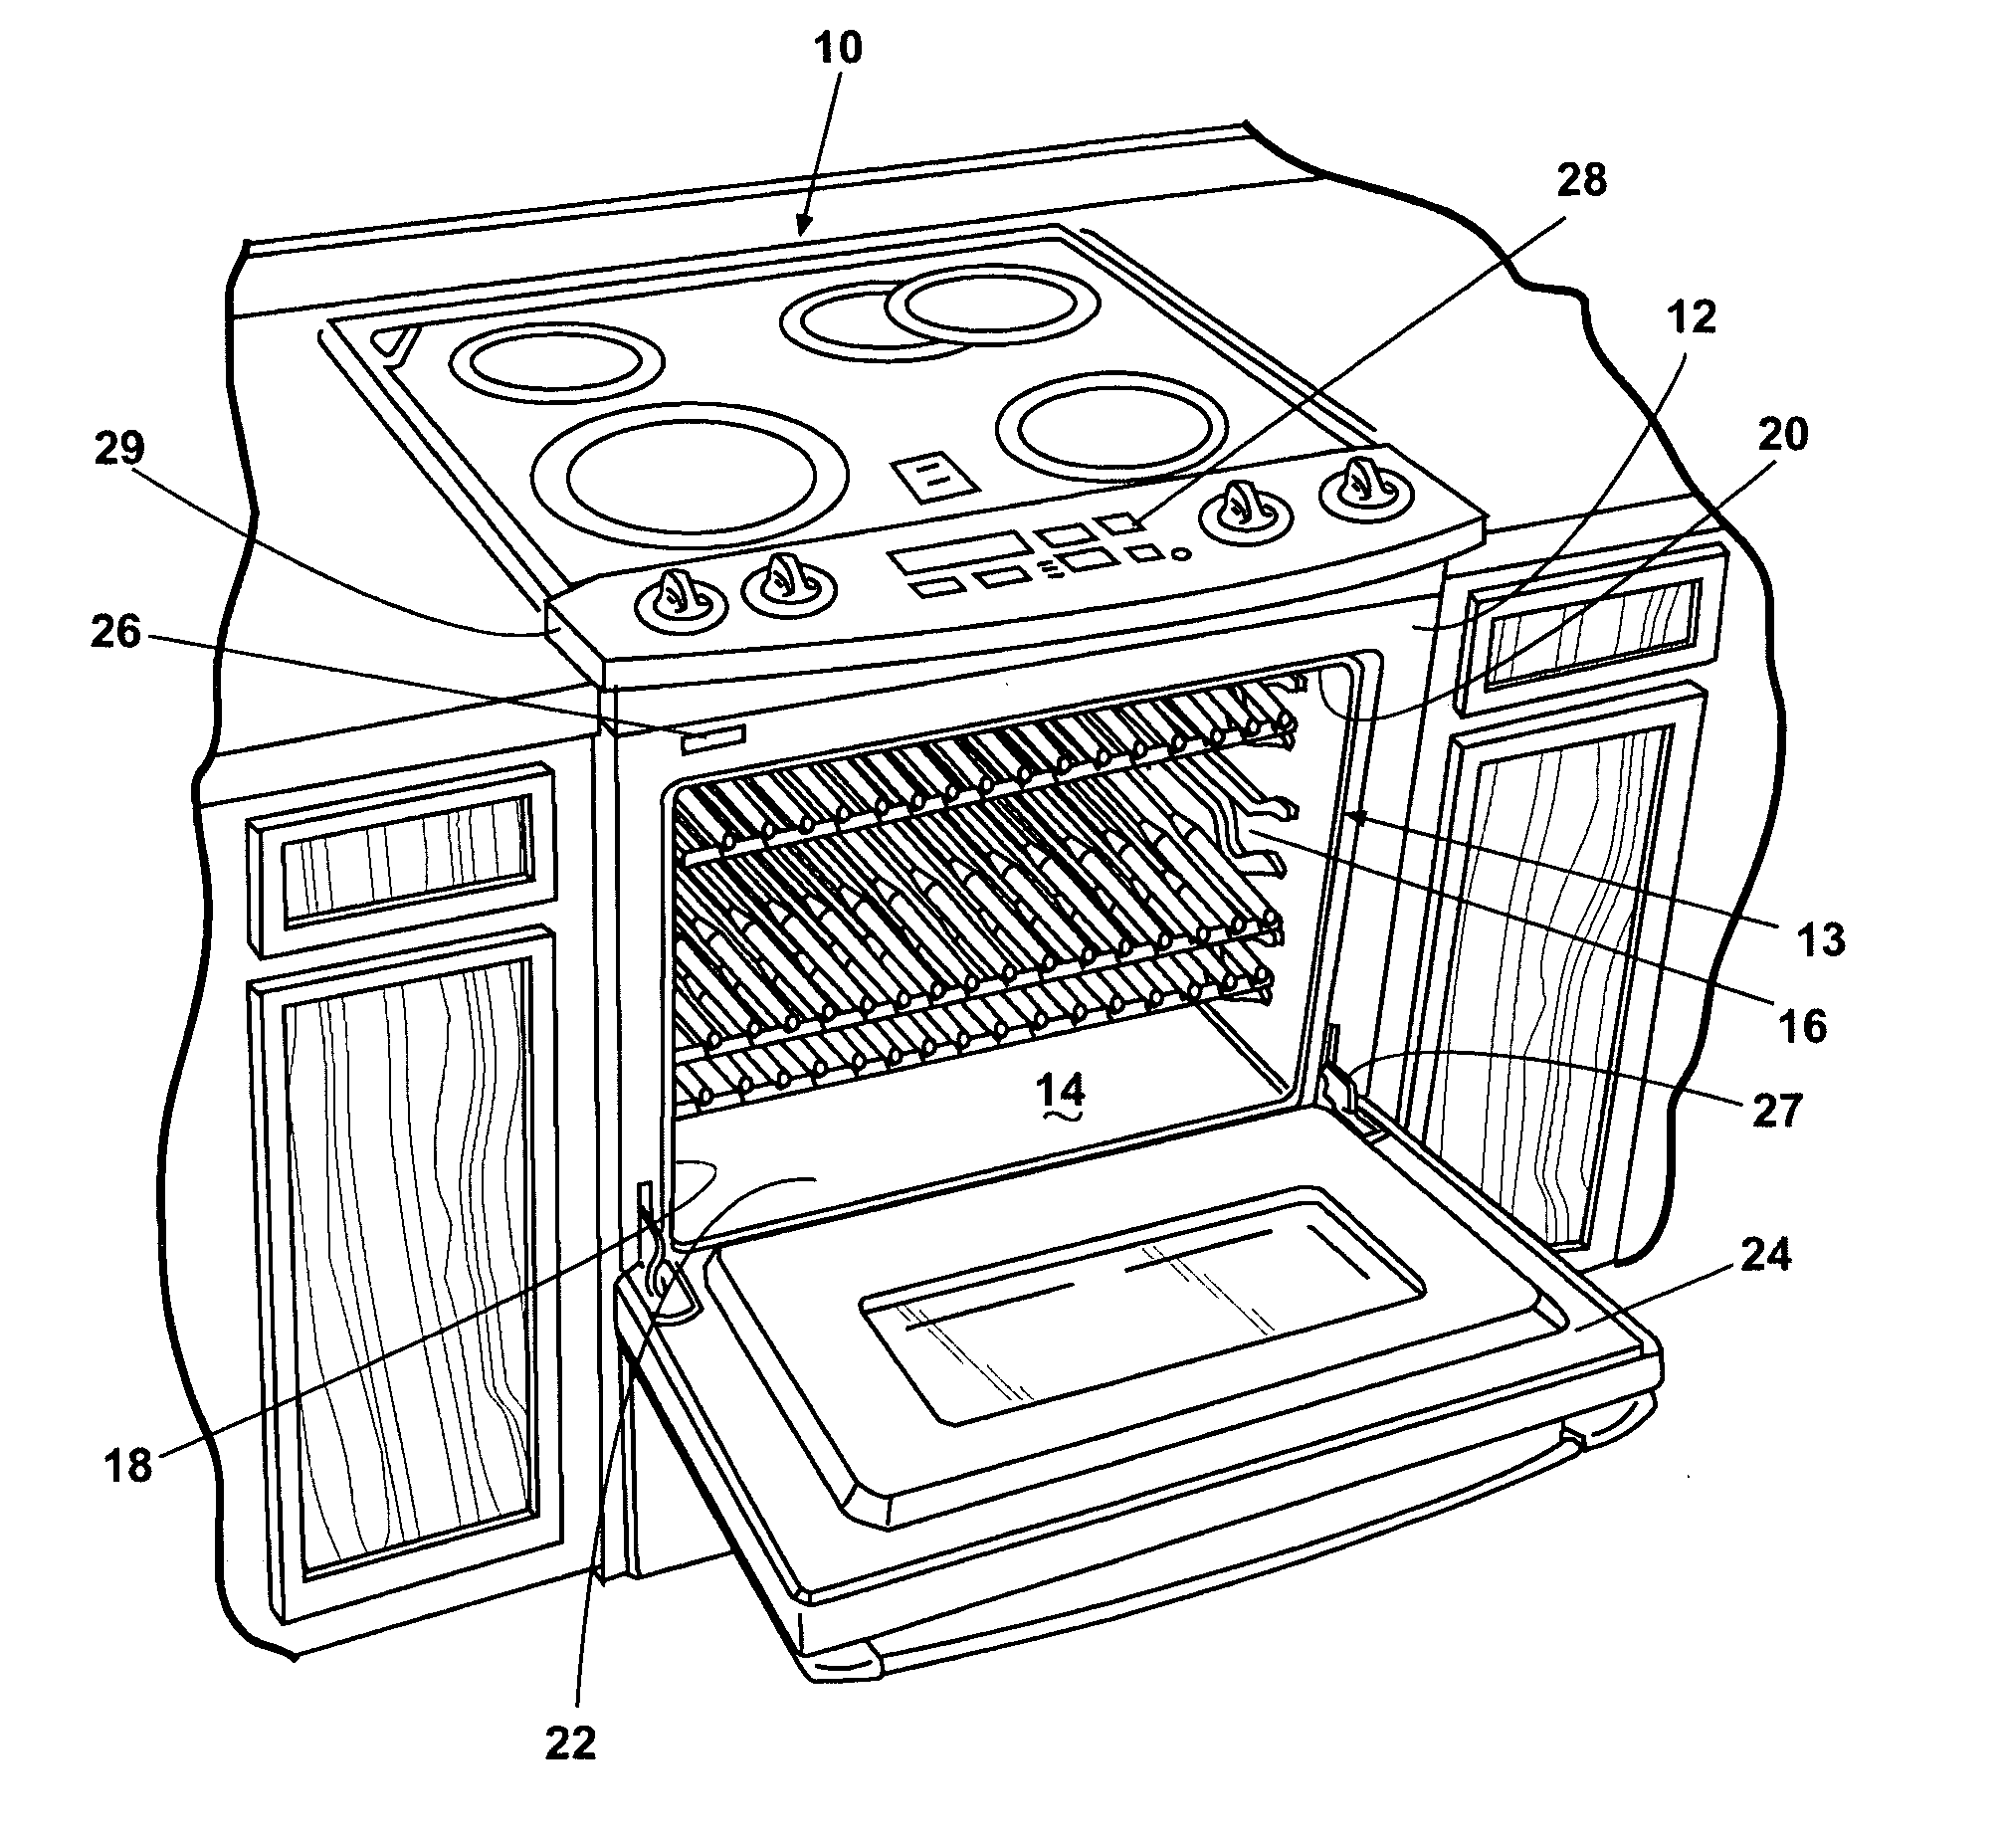 Oven with a system for generating steam